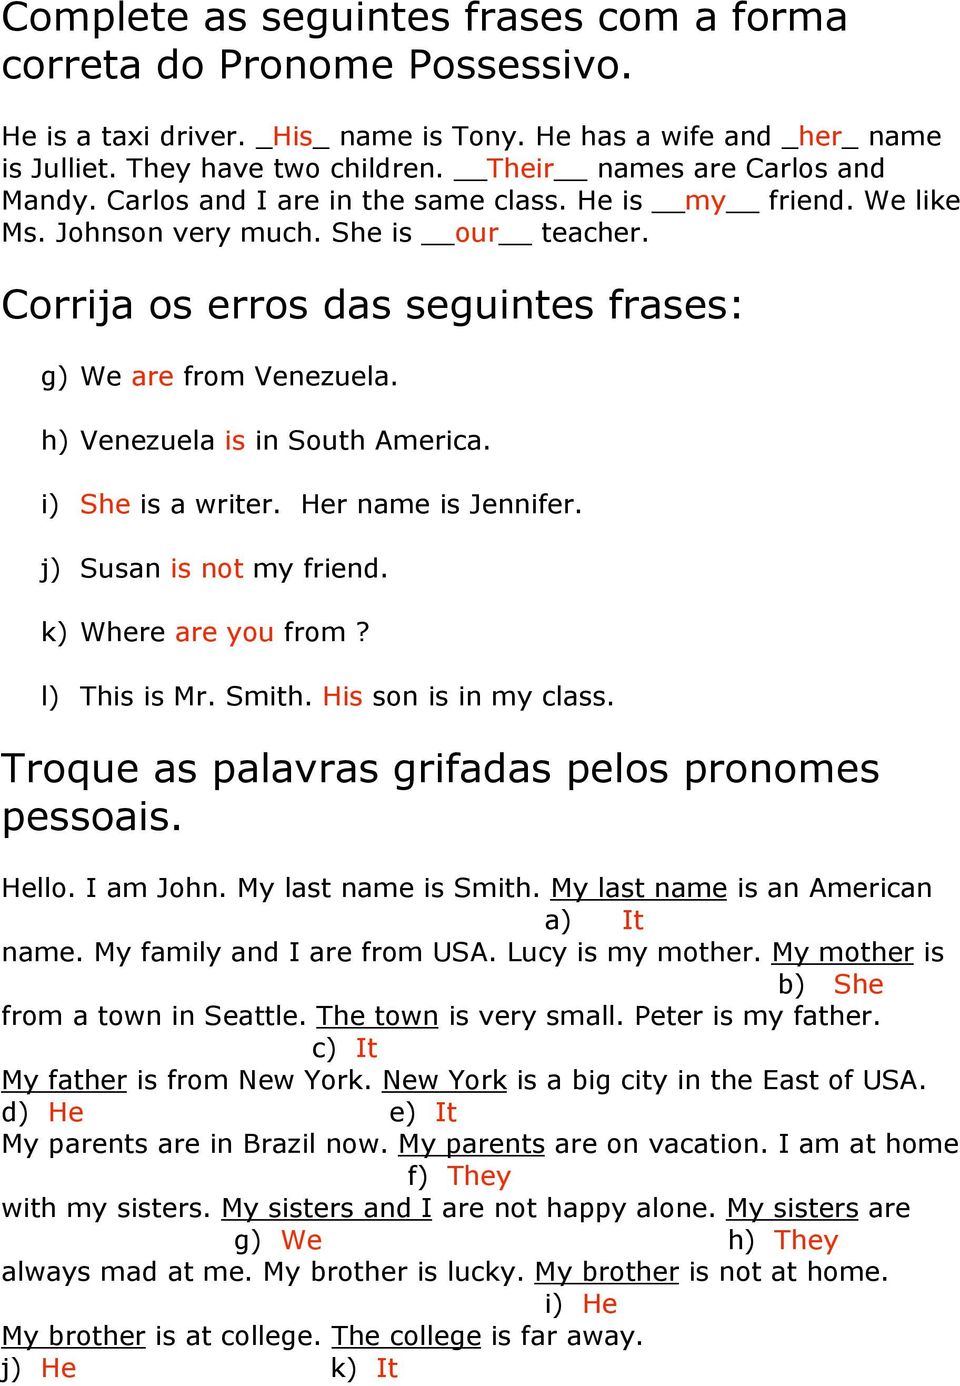 Corrija os erros das seguintes frases: g) We are from Venezuela. h) Venezuela is in South America. i) She is a writer. Her name is Jennifer. j) Susan is not my friend. k) Where are you from?